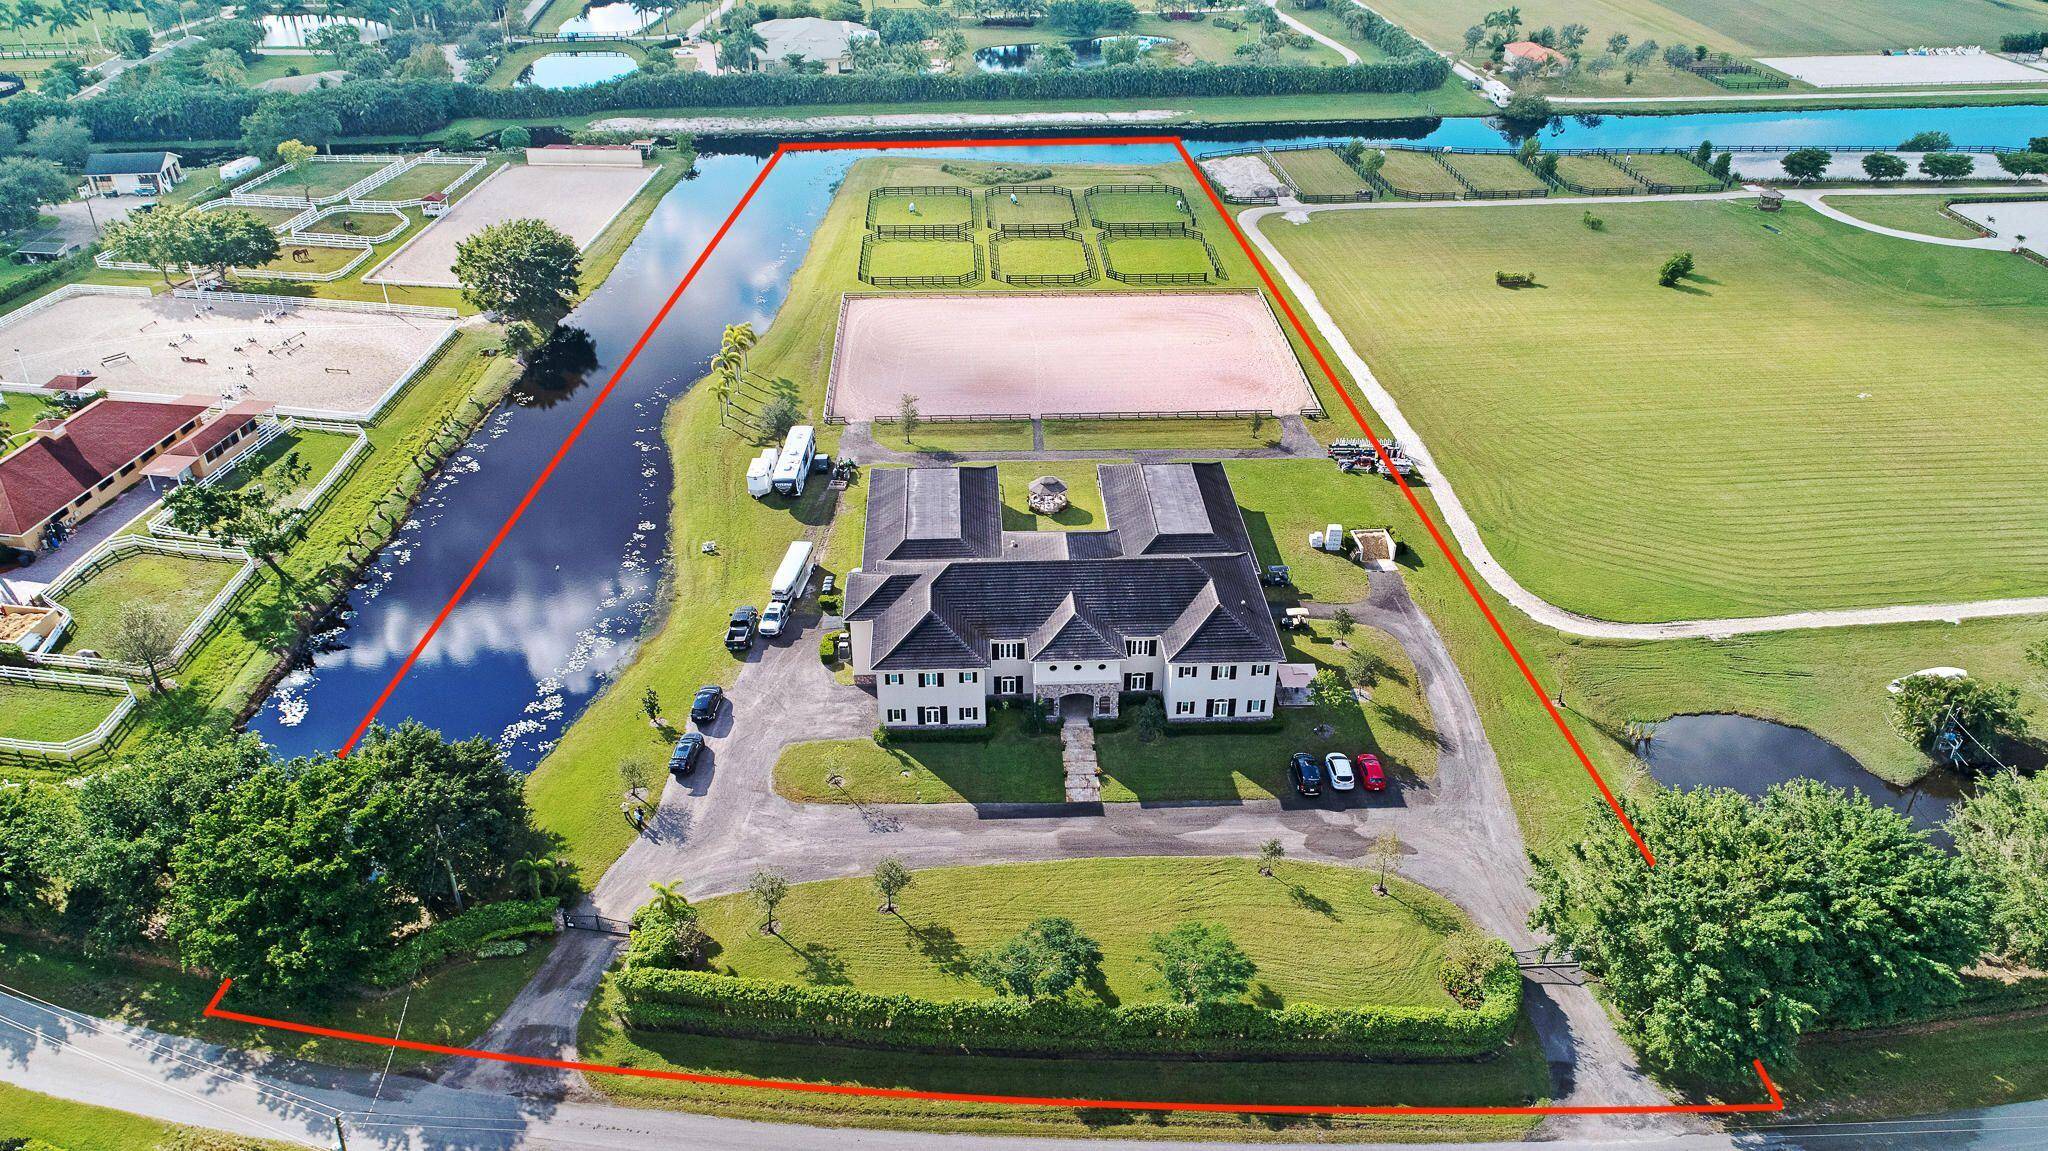 Exceptional 5. 5 acre equestrian facility consisting of two 12 stall wings, each with their own feed and tack rooms, equaling a Total of 24 stalls with a 2 bedroom ...